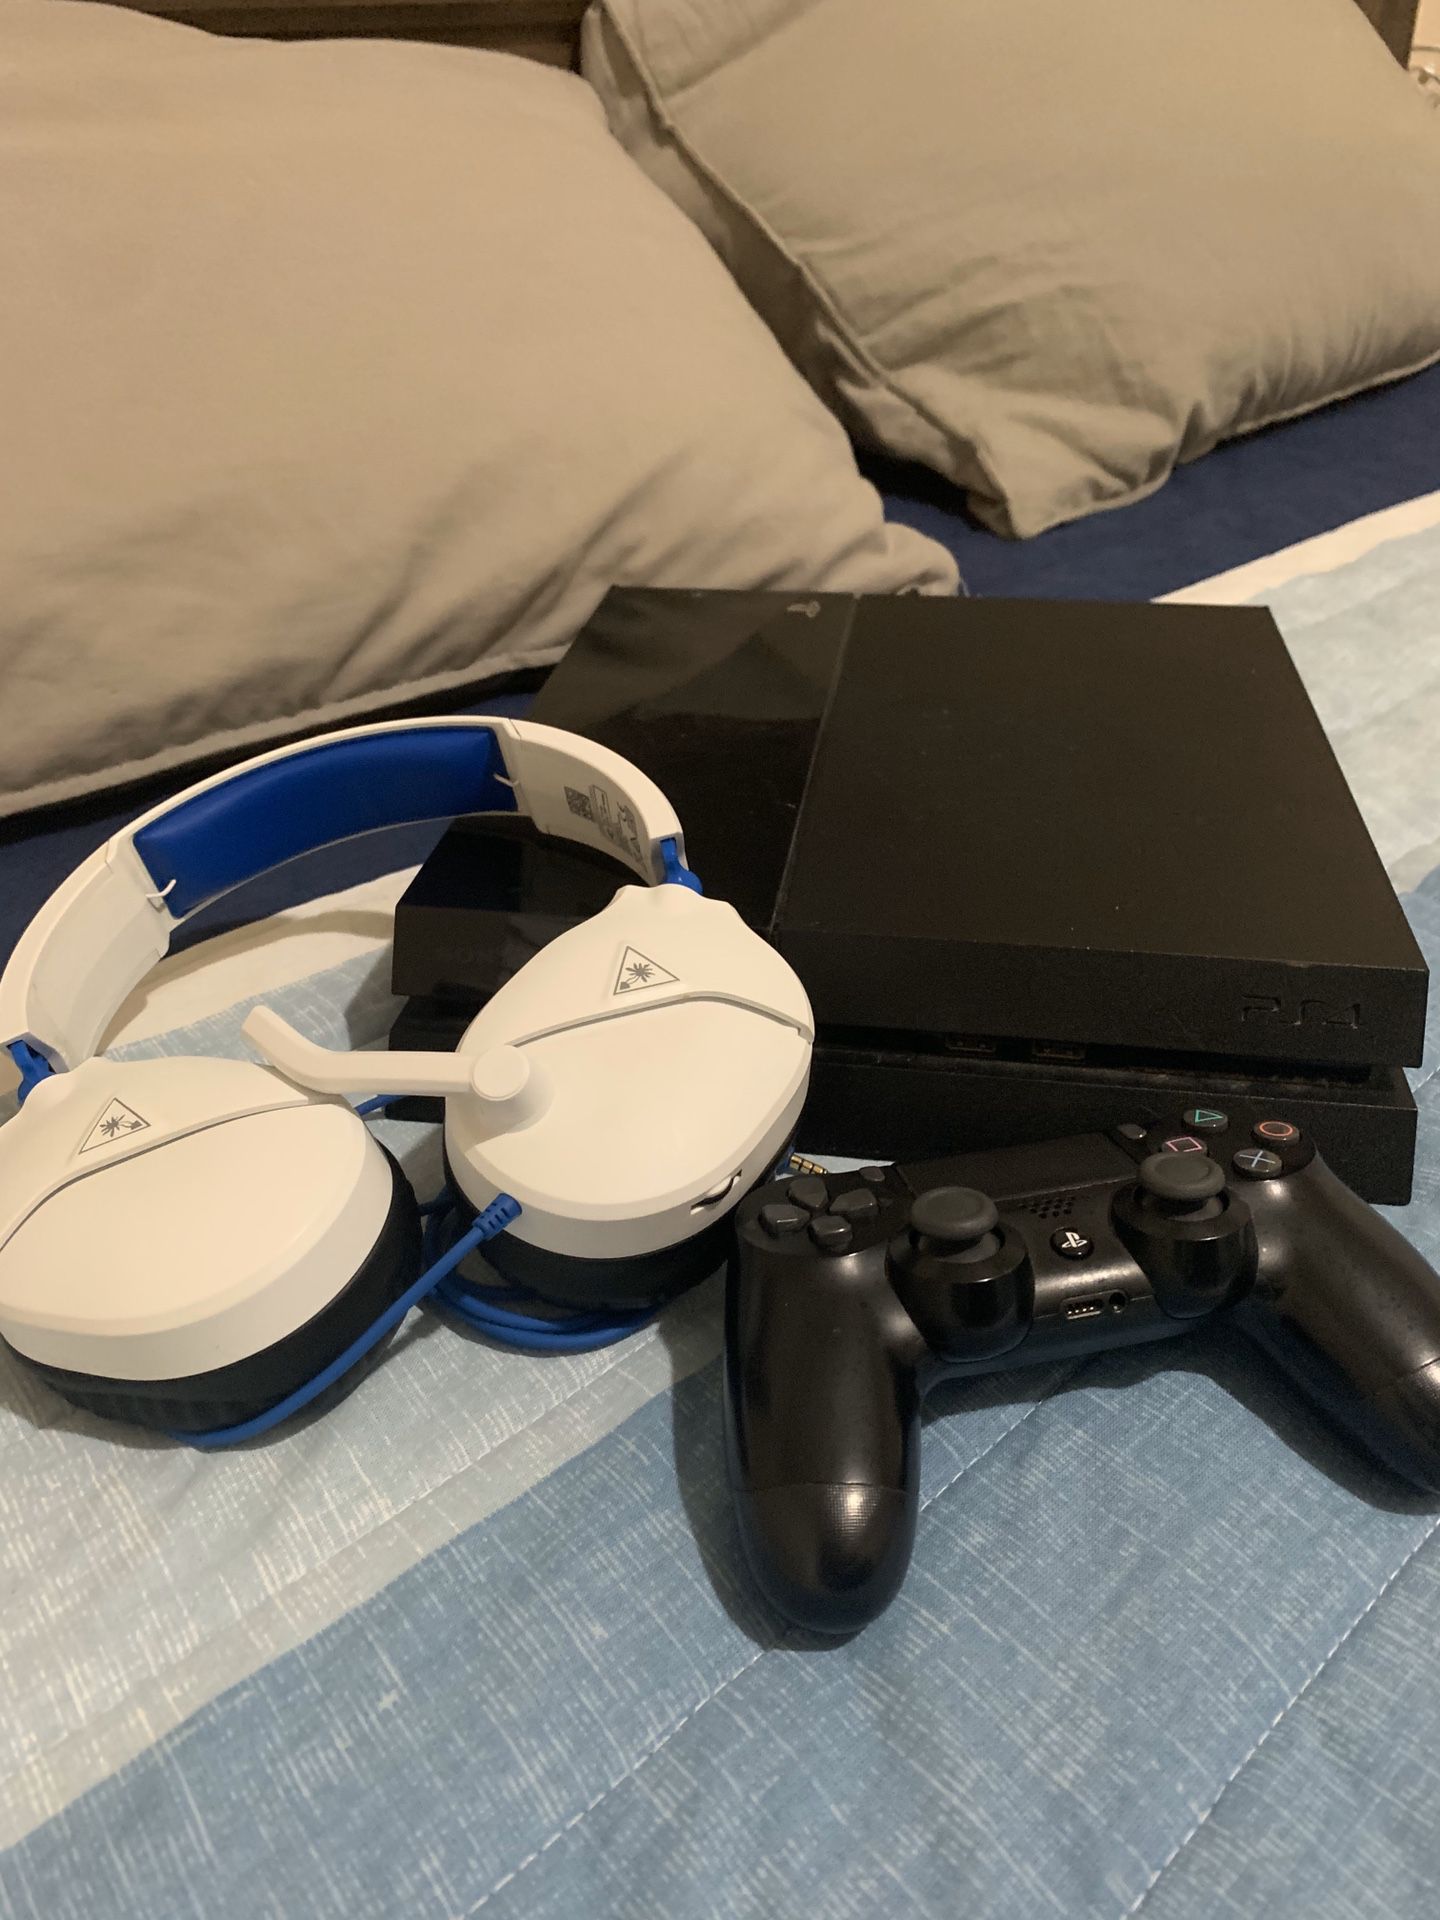 Ps4 FOR SALE